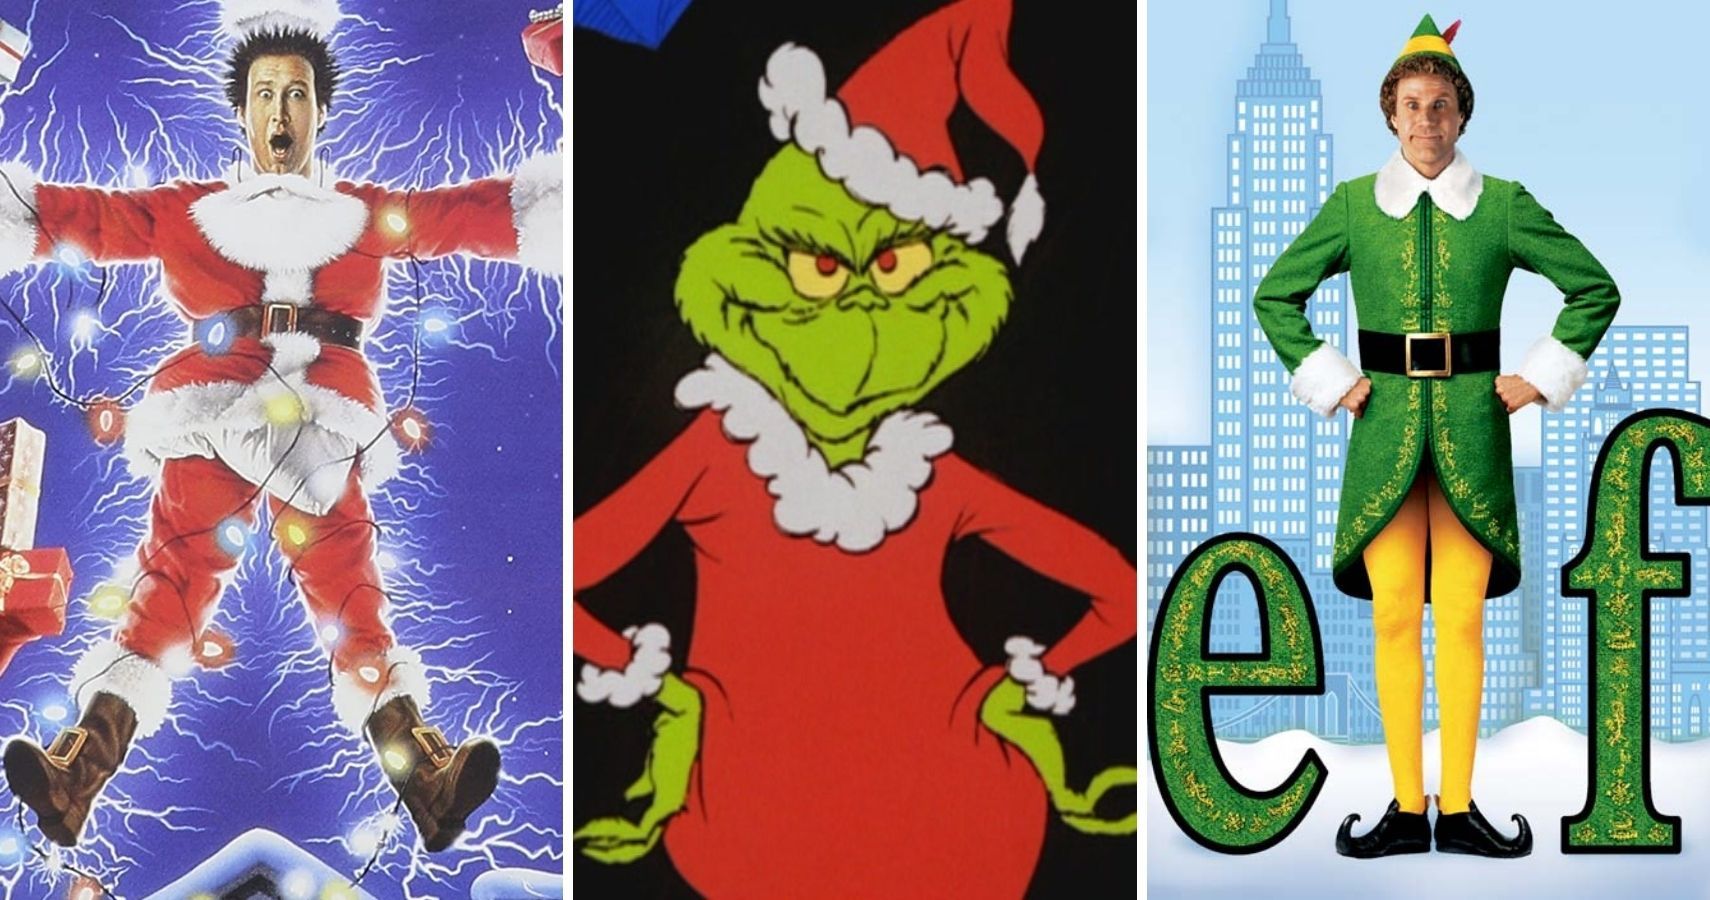 10 Funniest Christmas Comedies Ranked According To Rotten Tomatoes